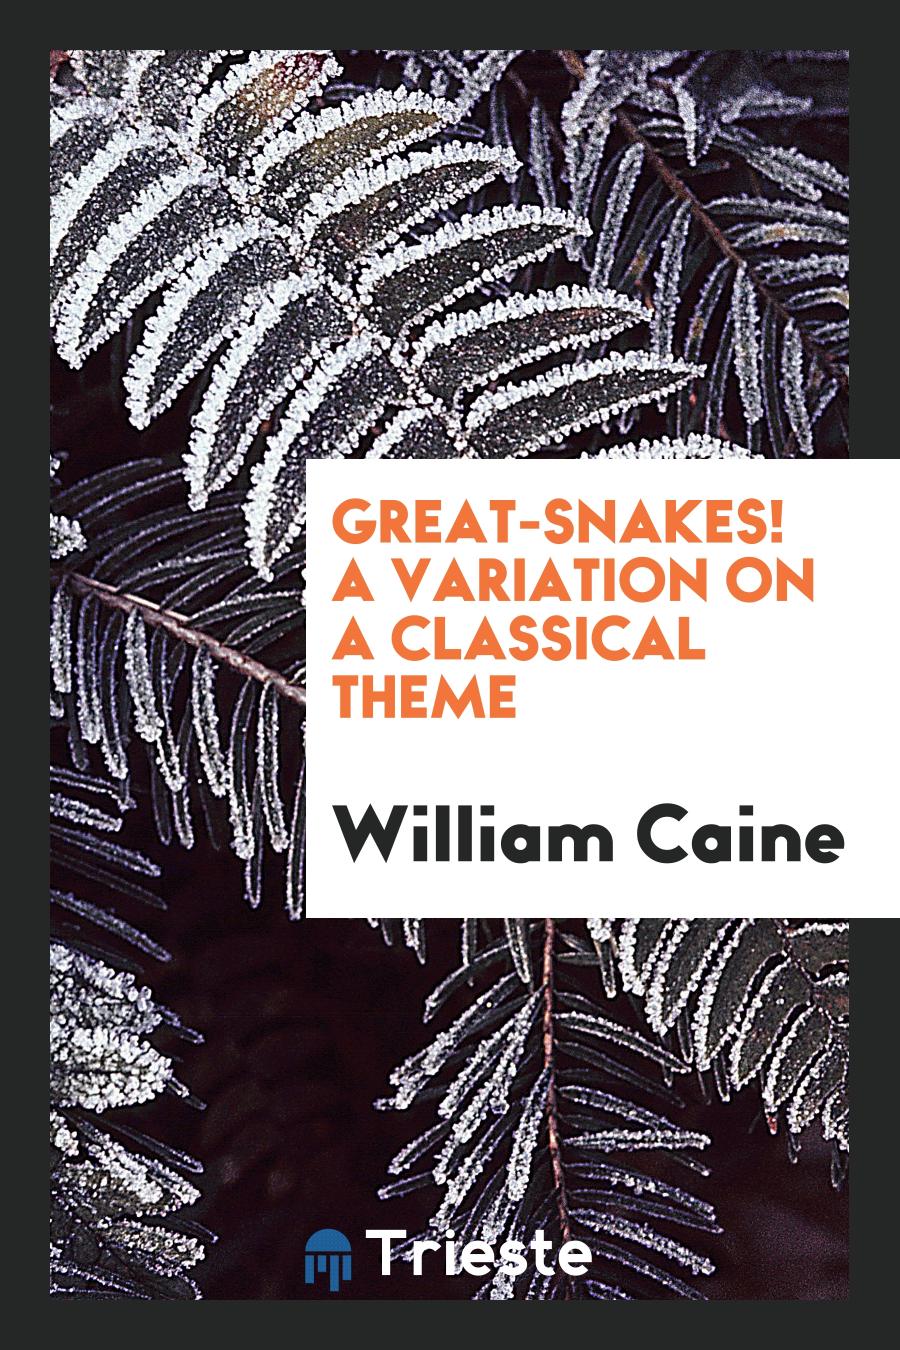 Great-Snakes! A Variation on a Classical Theme